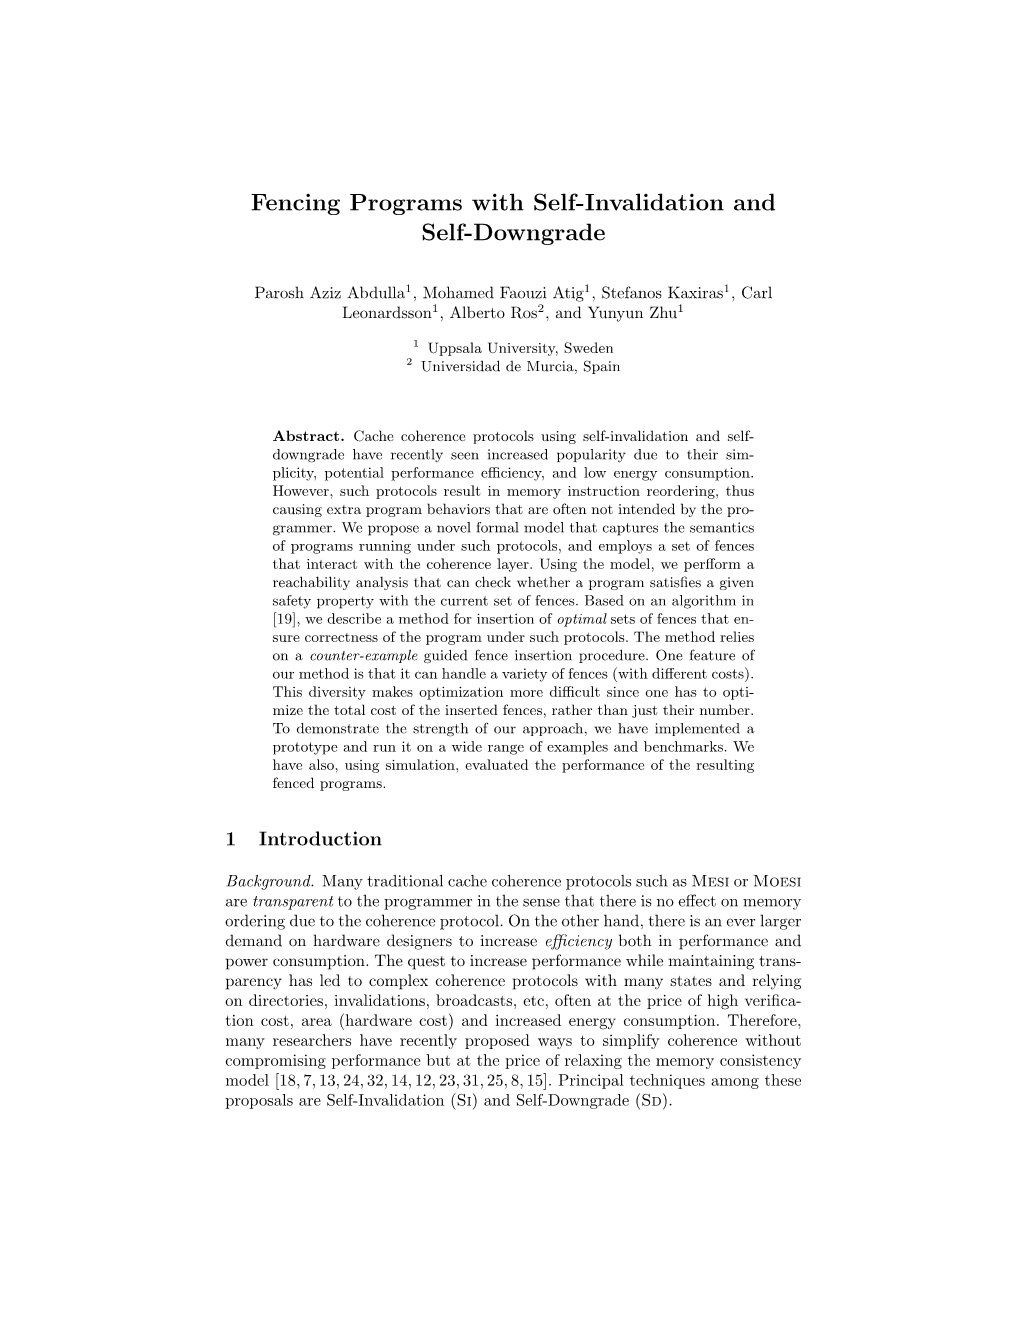 Fencing Programs with Self-Invalidation and Self-Downgrade